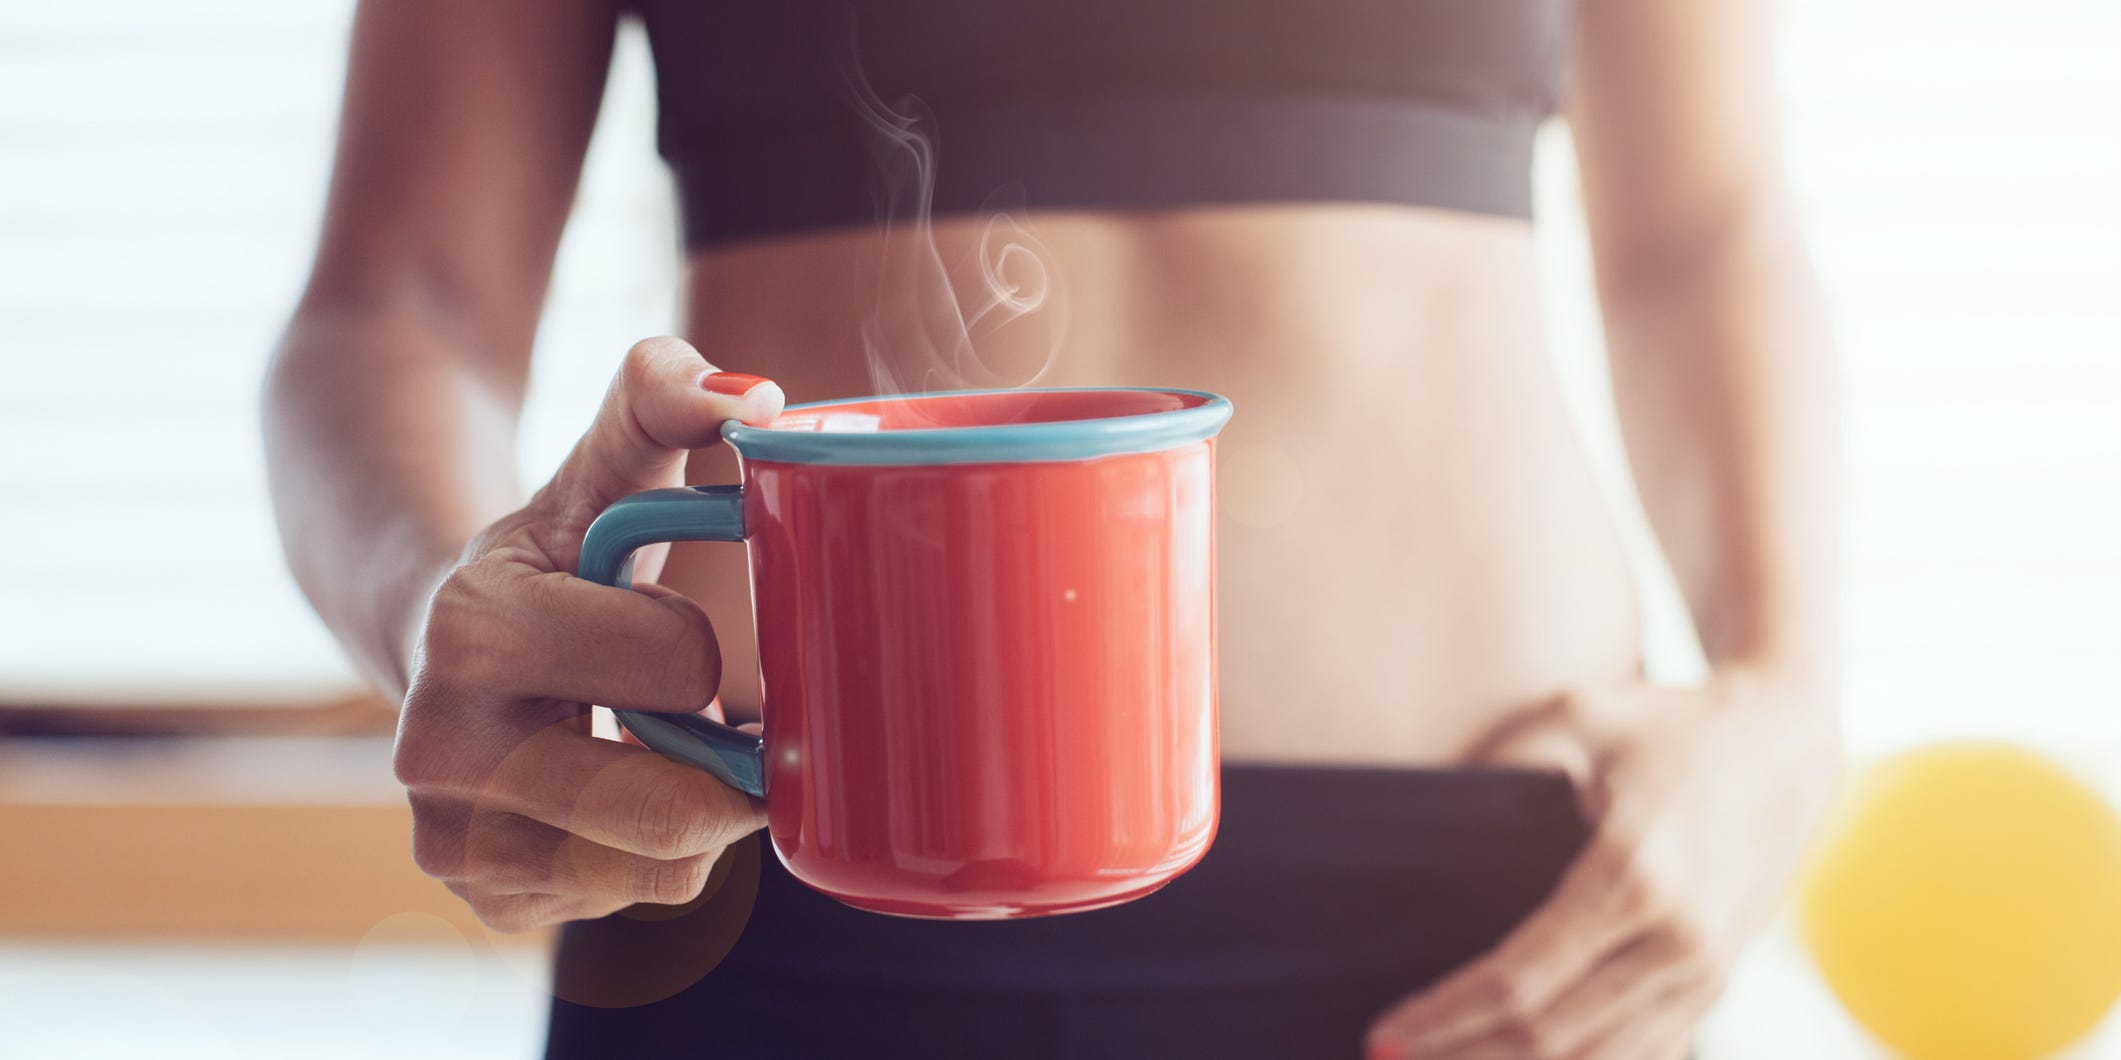 A woman in workout attire holds a cup of coffee.